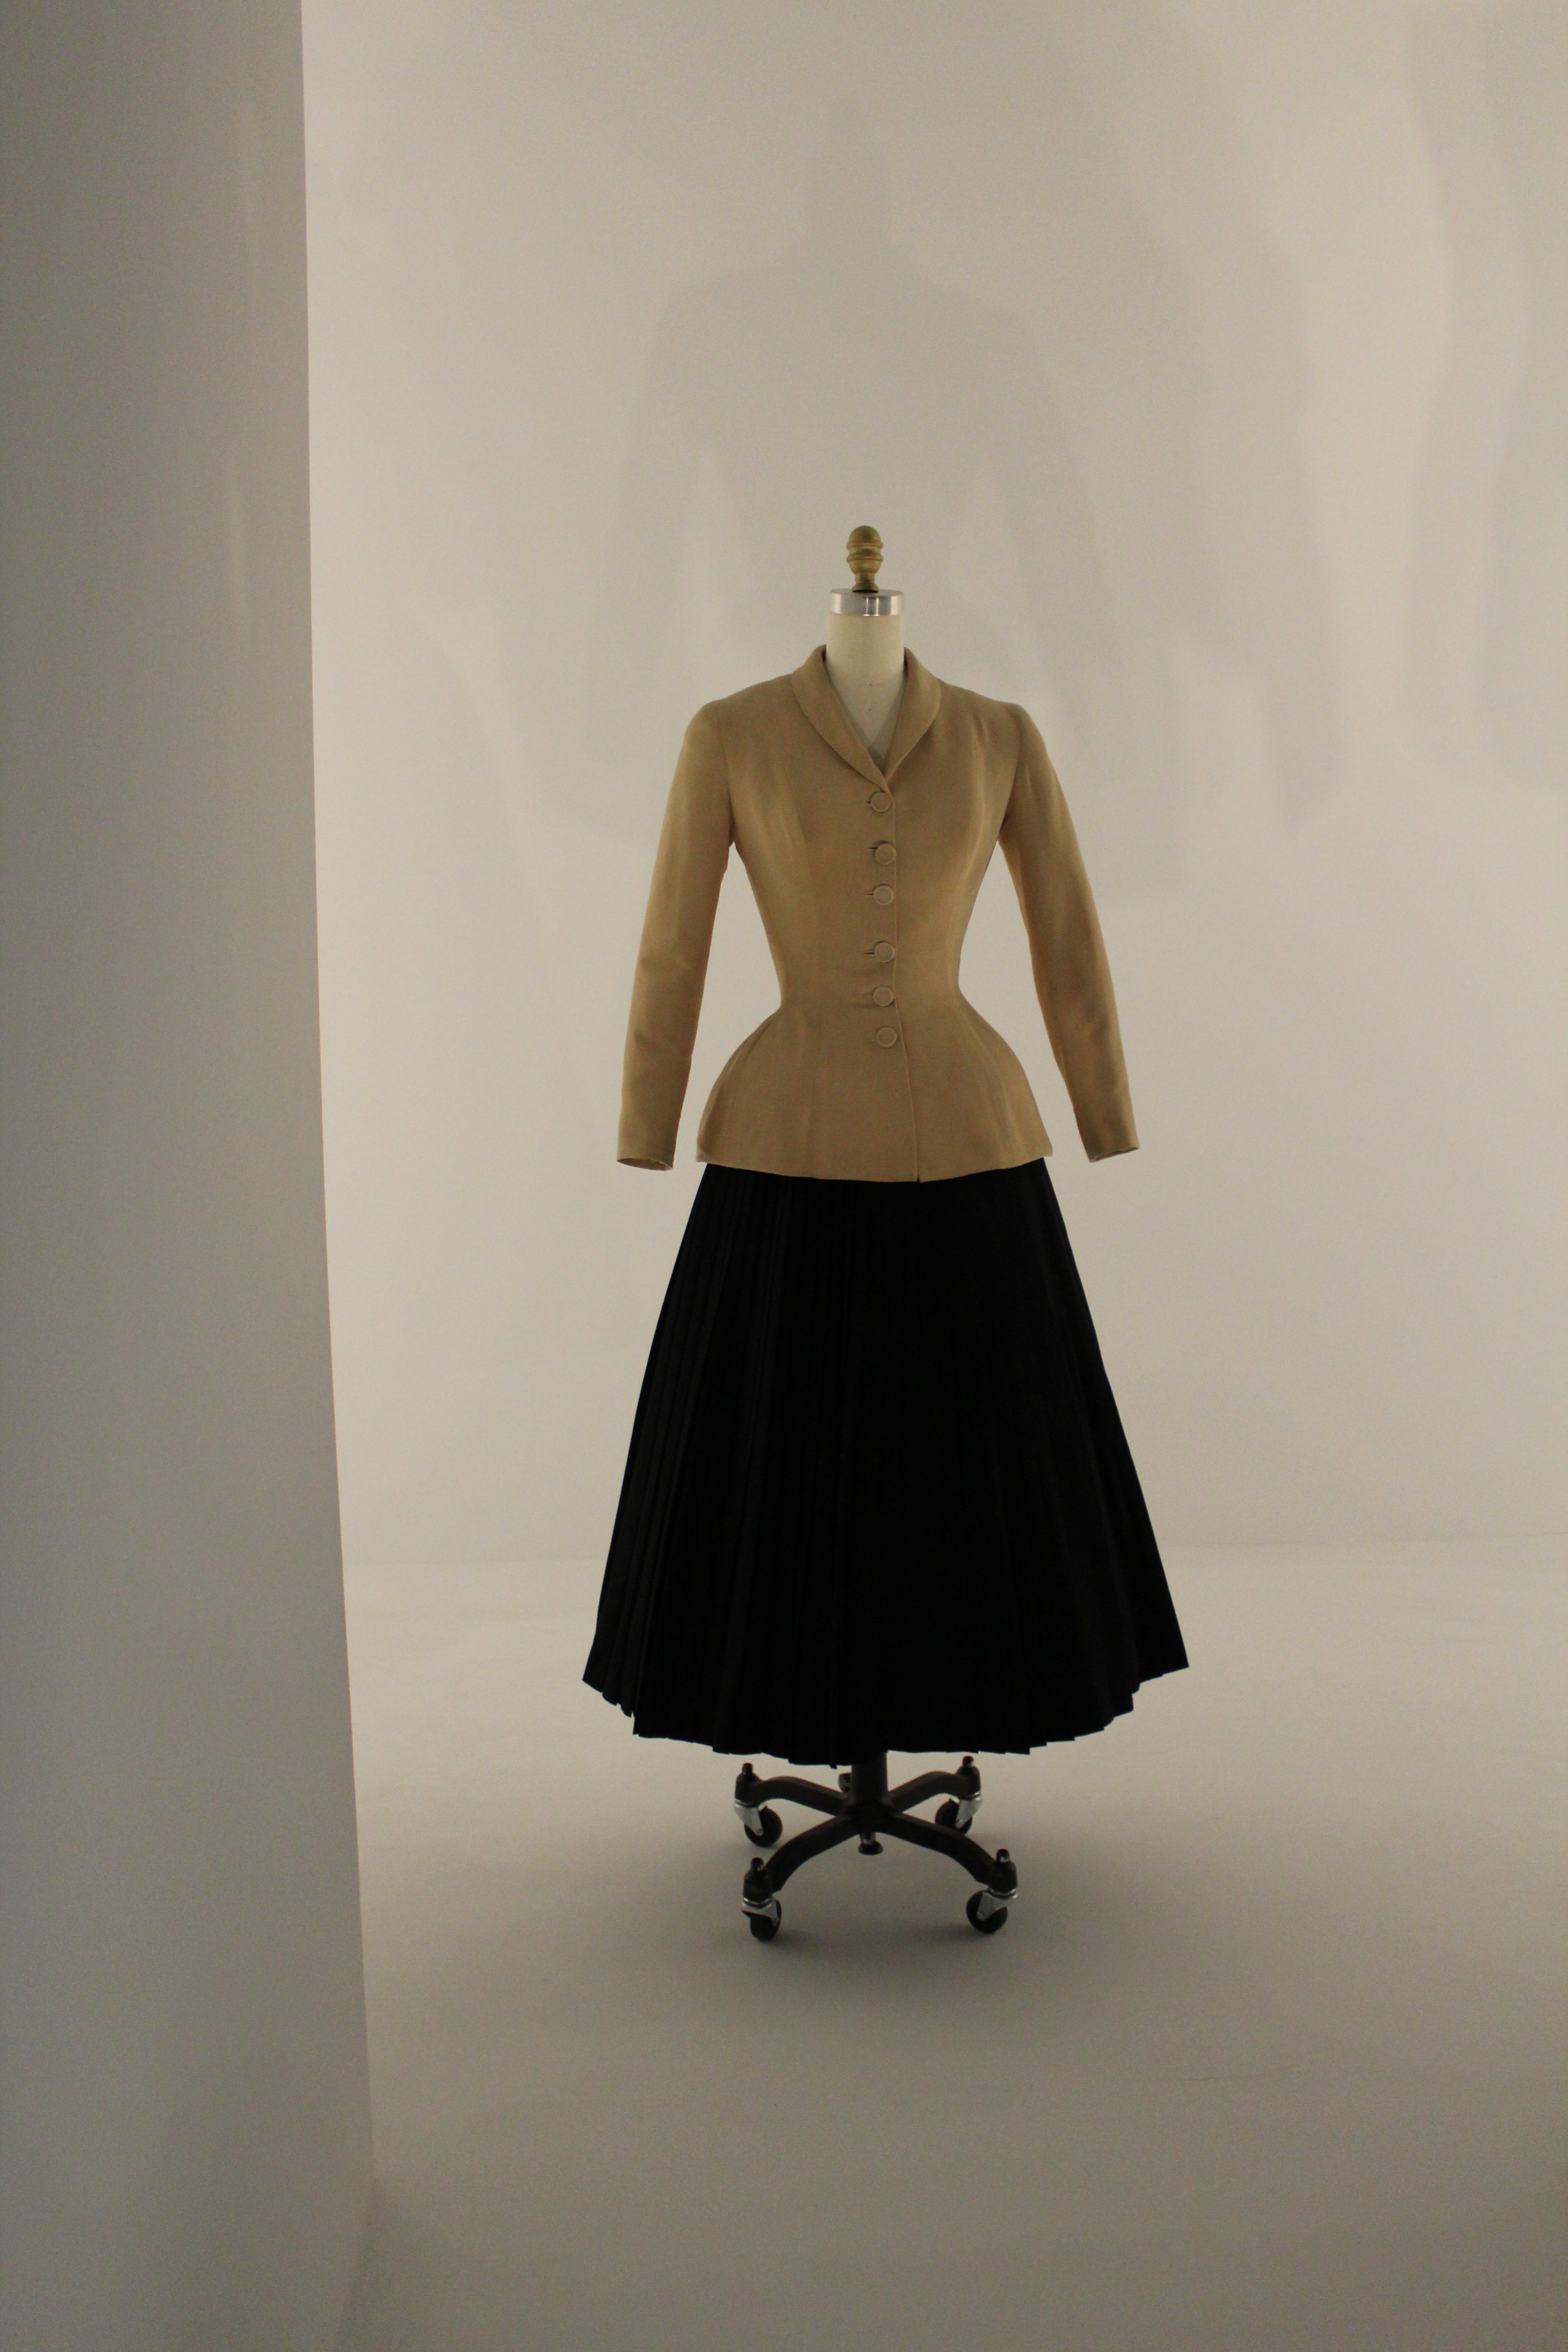 New York Calling: Manus x Machina: Fashion In An Of Technology. House of Dior, Christian Dior (french, 1905-1957) Bar Suit Jacket, spring/summer 1947, Haute Couture Machine -swen beige tussore silk plain weave, hand-stitched bound buttonholes, hand-pad-stitched interlining.